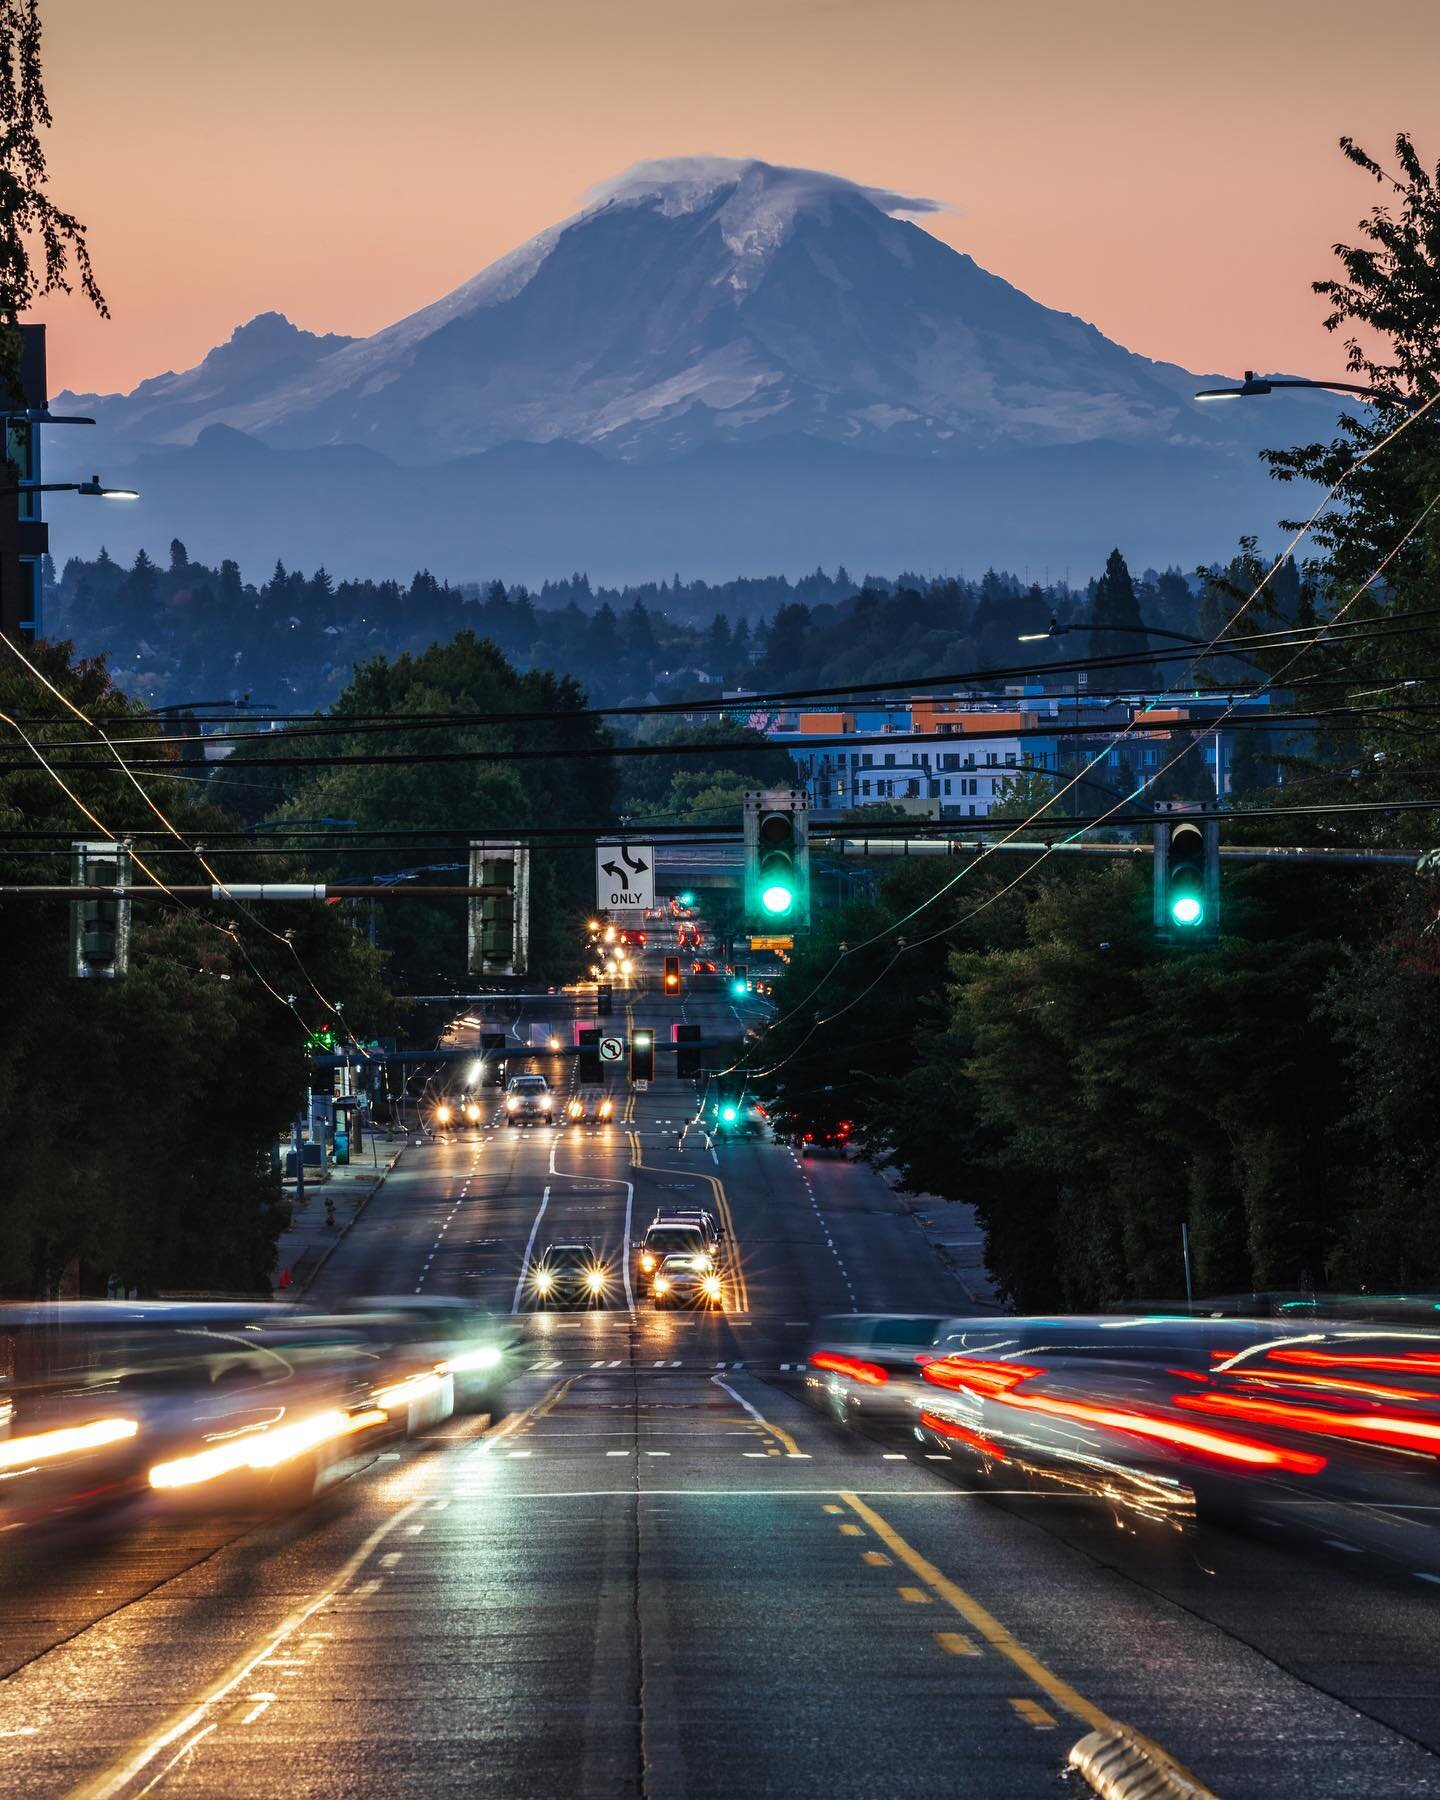 Rise and shine Seattle! The mountain is out! 
.
.
.
.
#curiocityseattle #pnw_shooters #shooters #citykillerz #seattle_sites #night_owlz #seattle #toneception #shotz_fired #nightshooters #electic_shotz #sonyimages #artofvisuals #clickcity #creativeopt